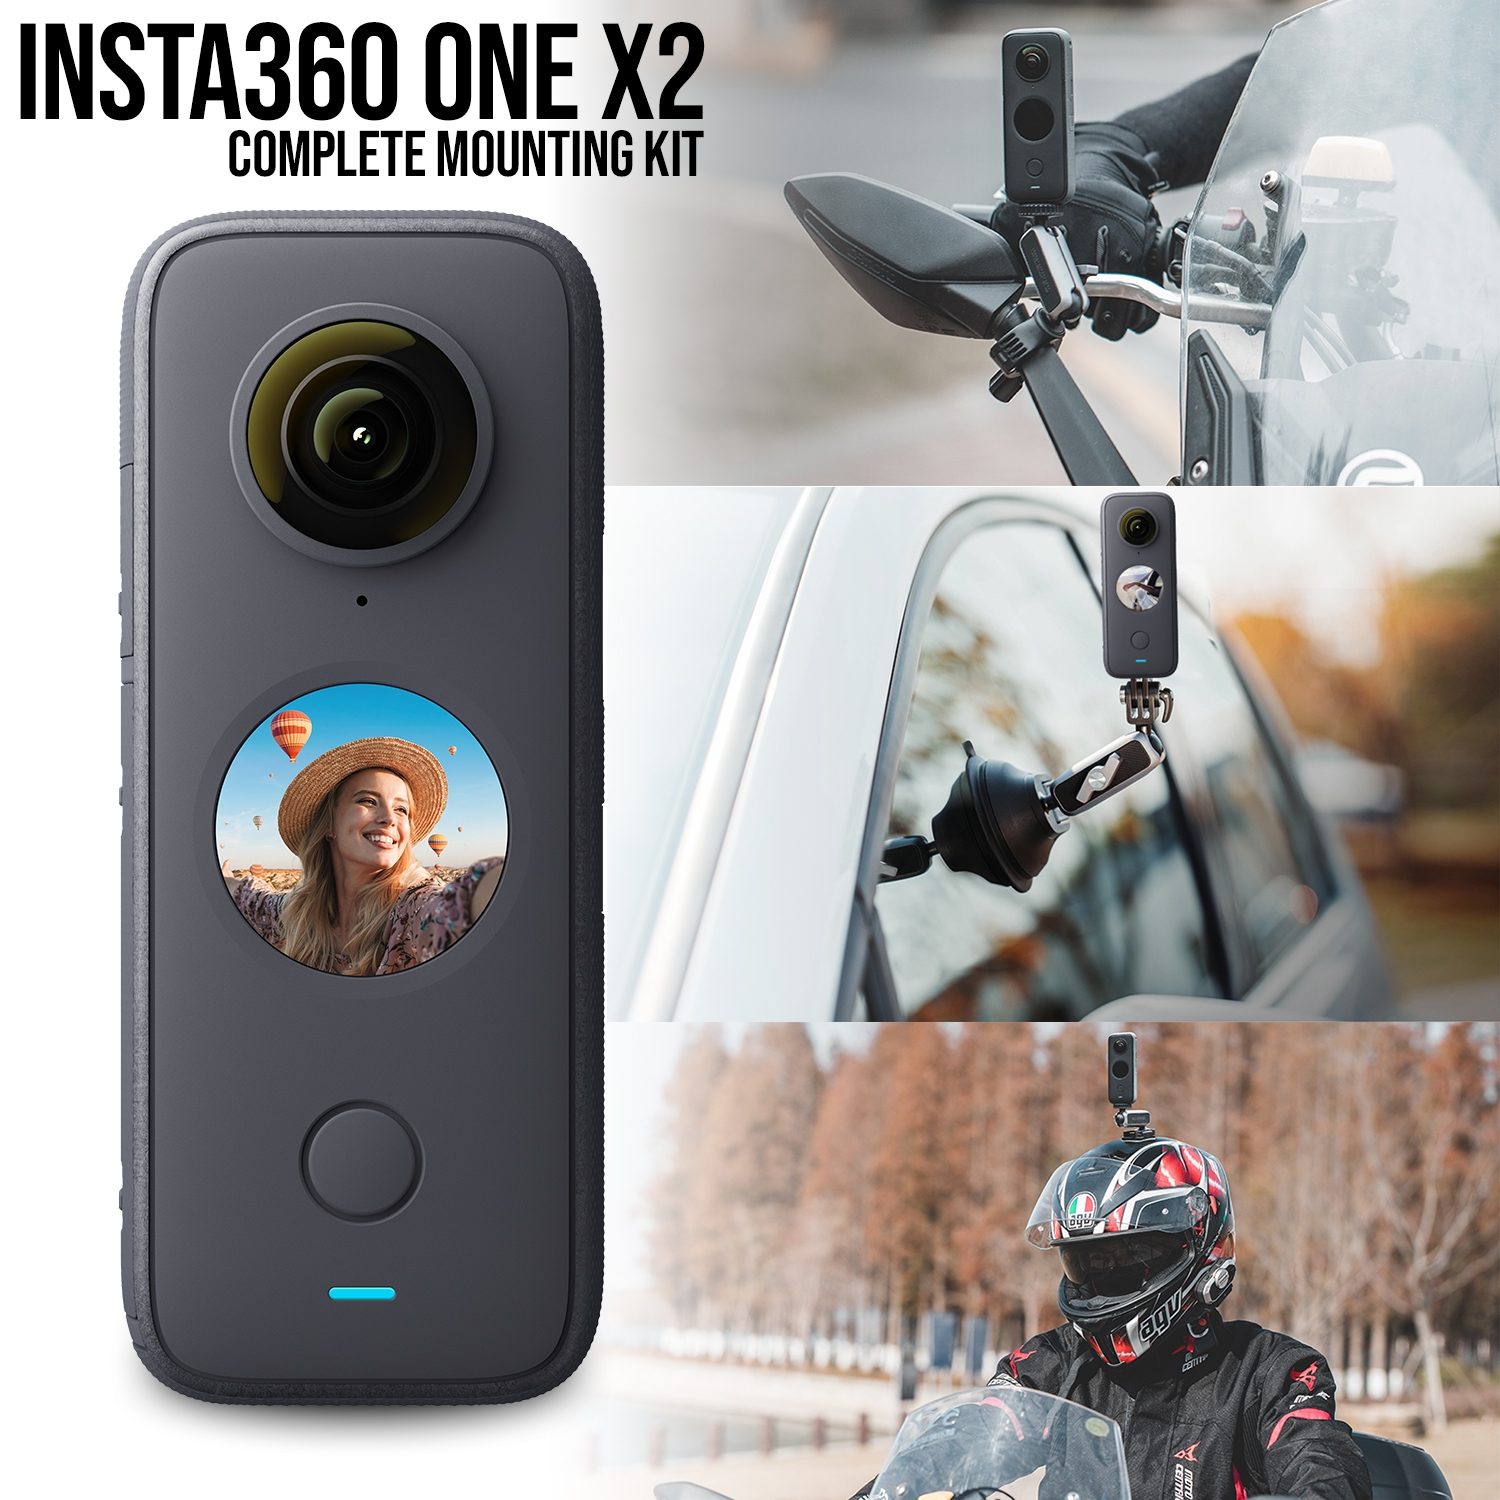 Insta360 ONE X2 Complete Mounting Kit